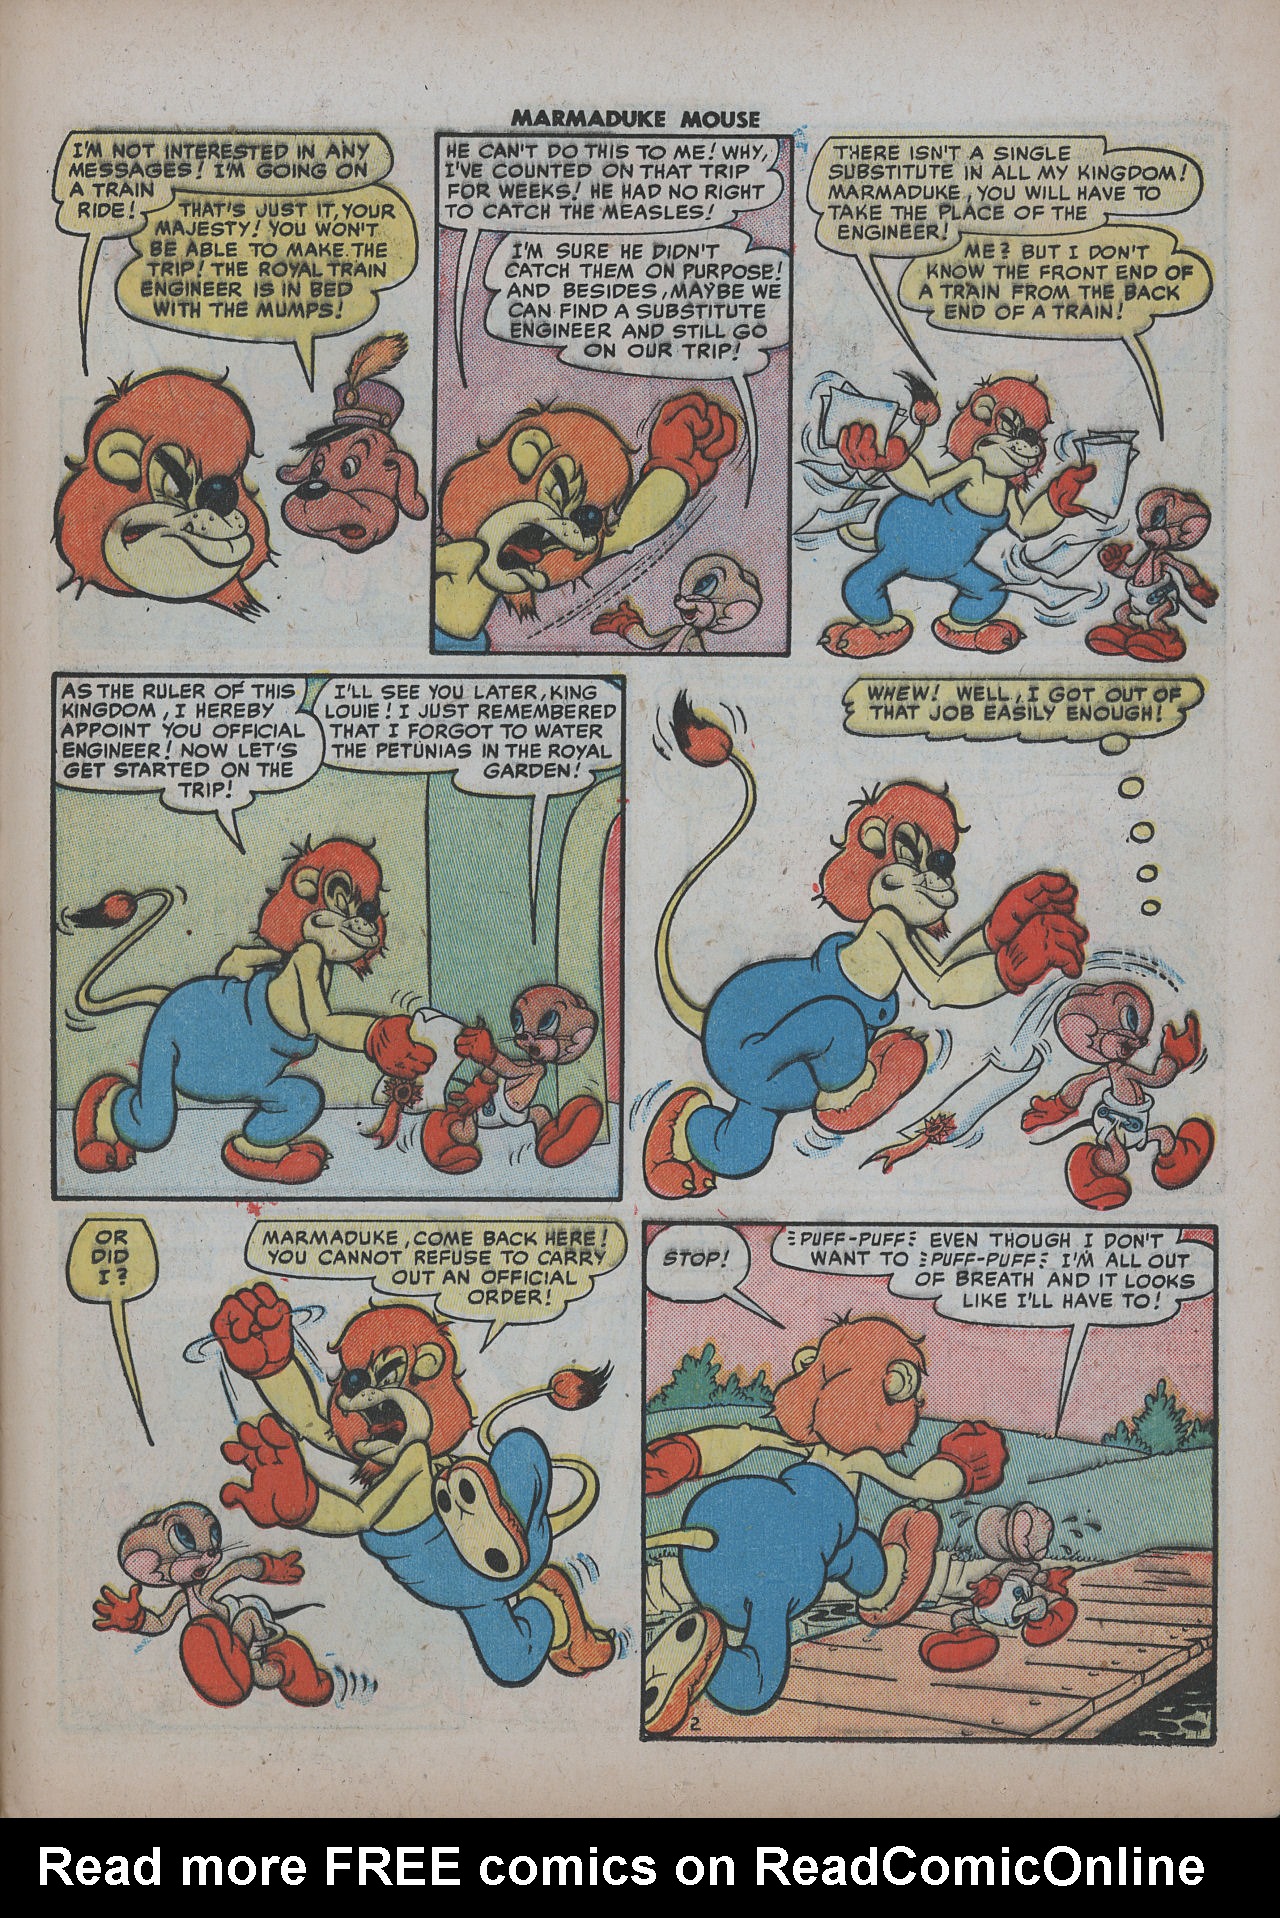 Read online Marmaduke Mouse comic -  Issue #23 - 33